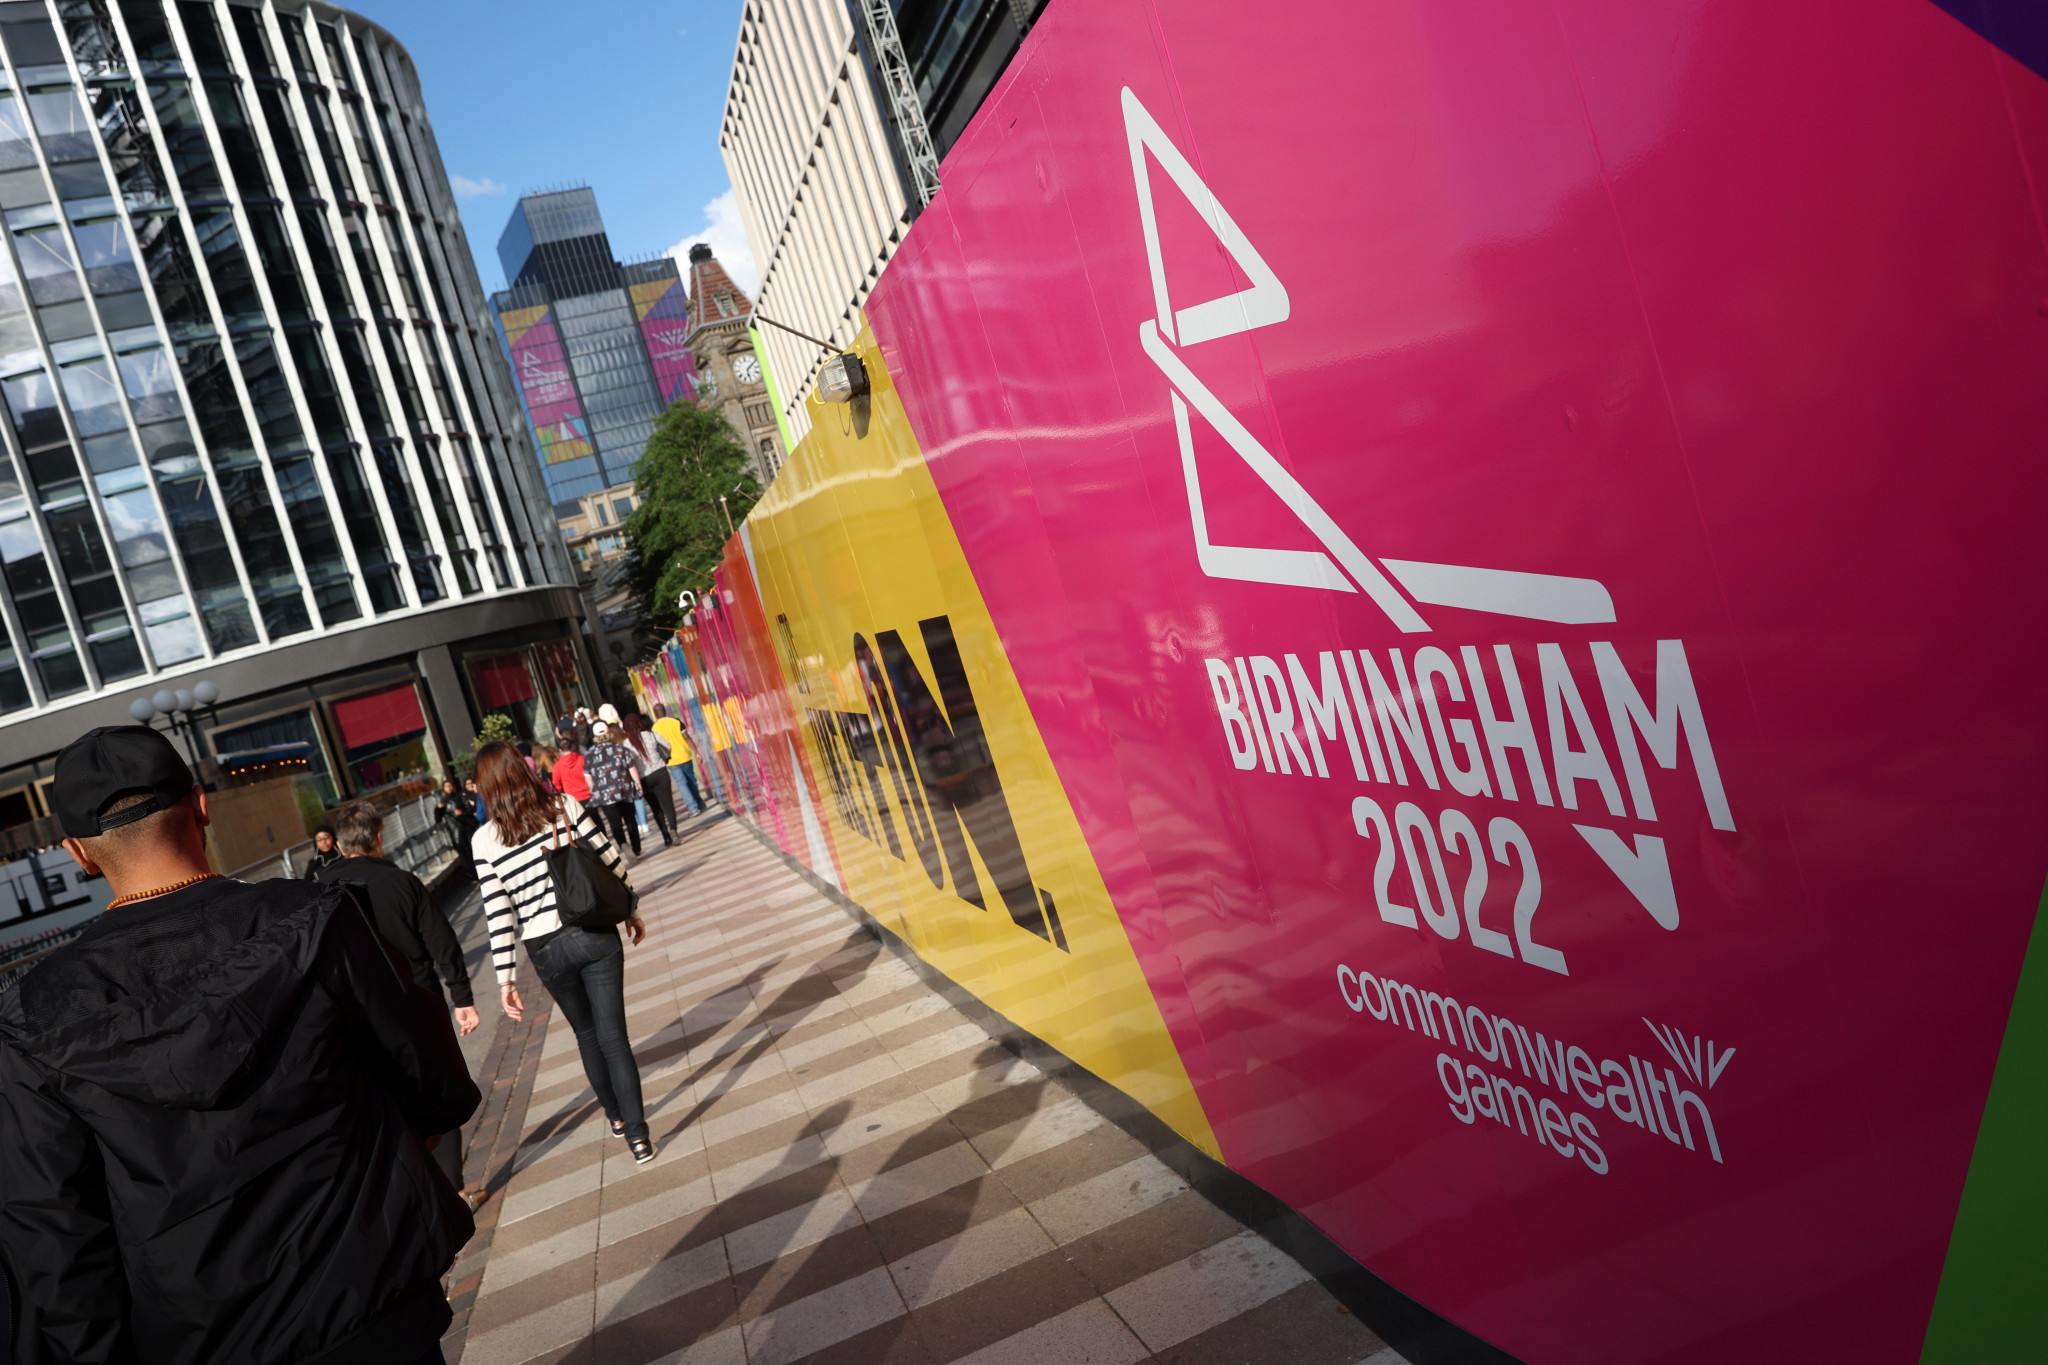 Birmingham 2022 is being hailed as having helped establish trading relations between the UK and other Commonwealth countries ©Getty Images